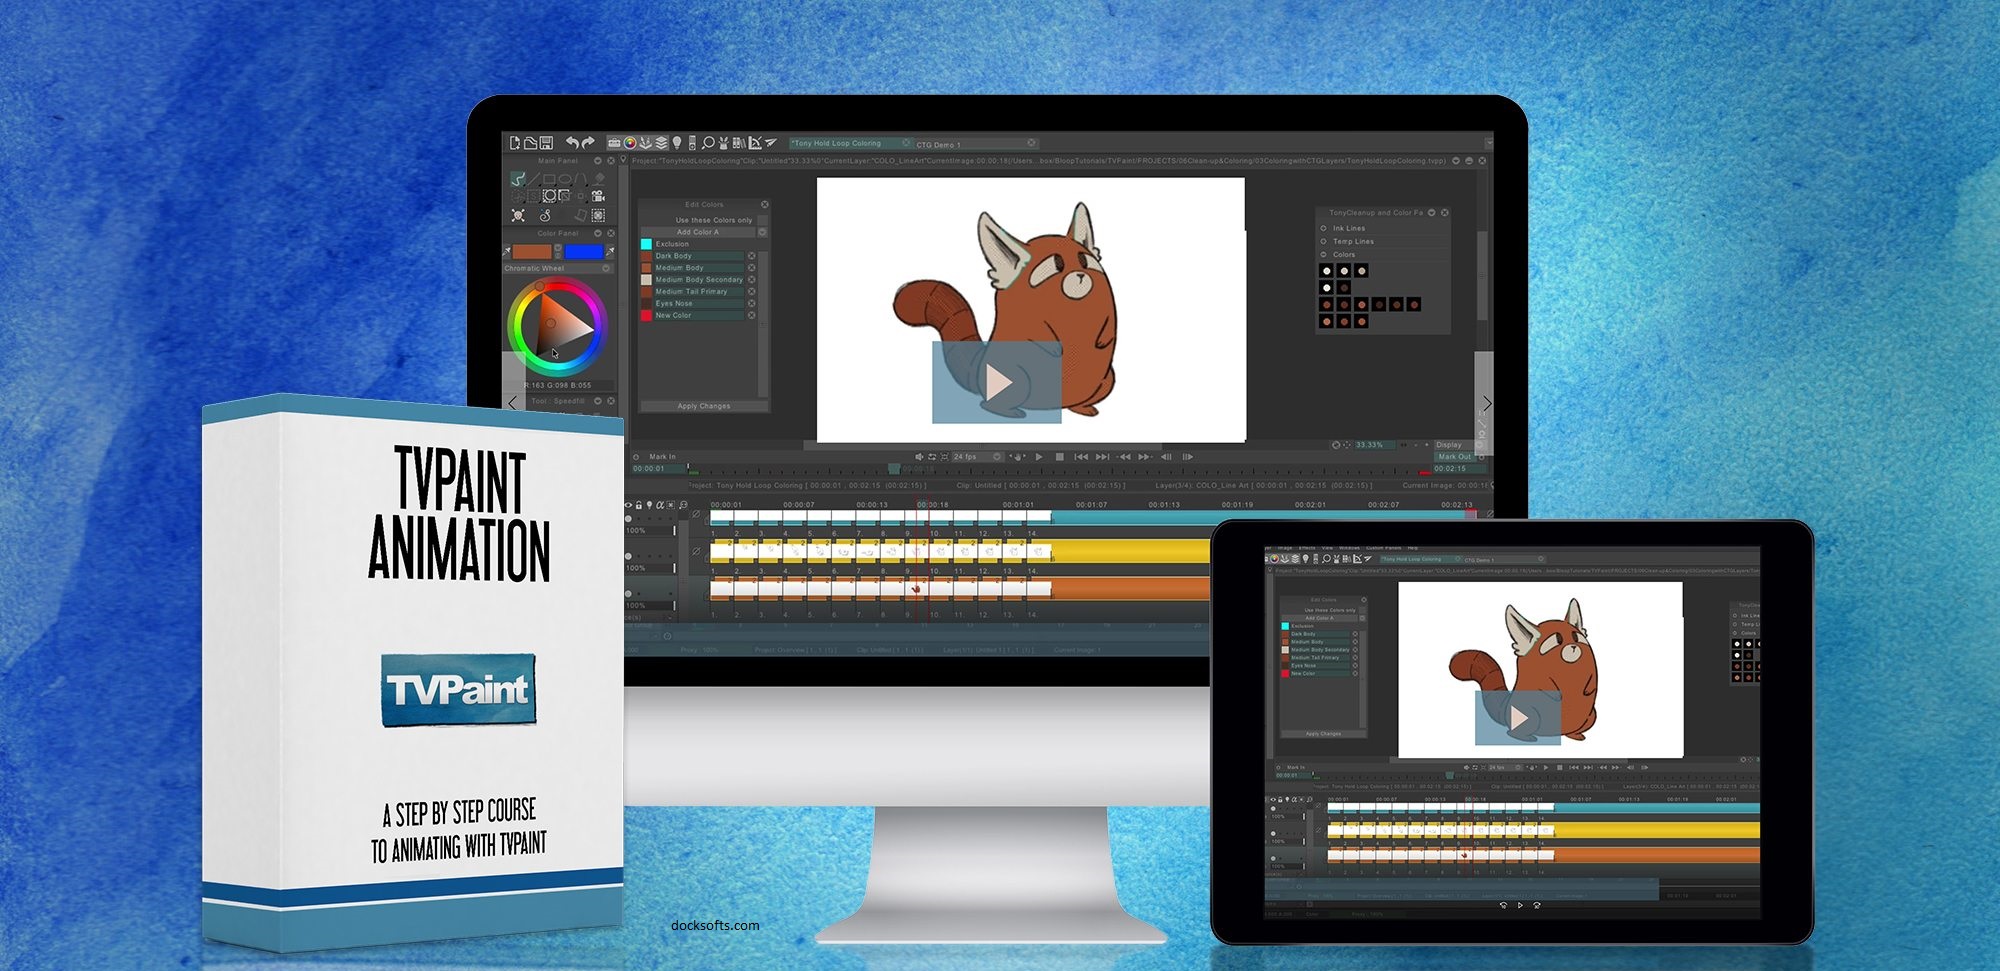 Tvpaint Animation Pro 11.8.4 With Crack